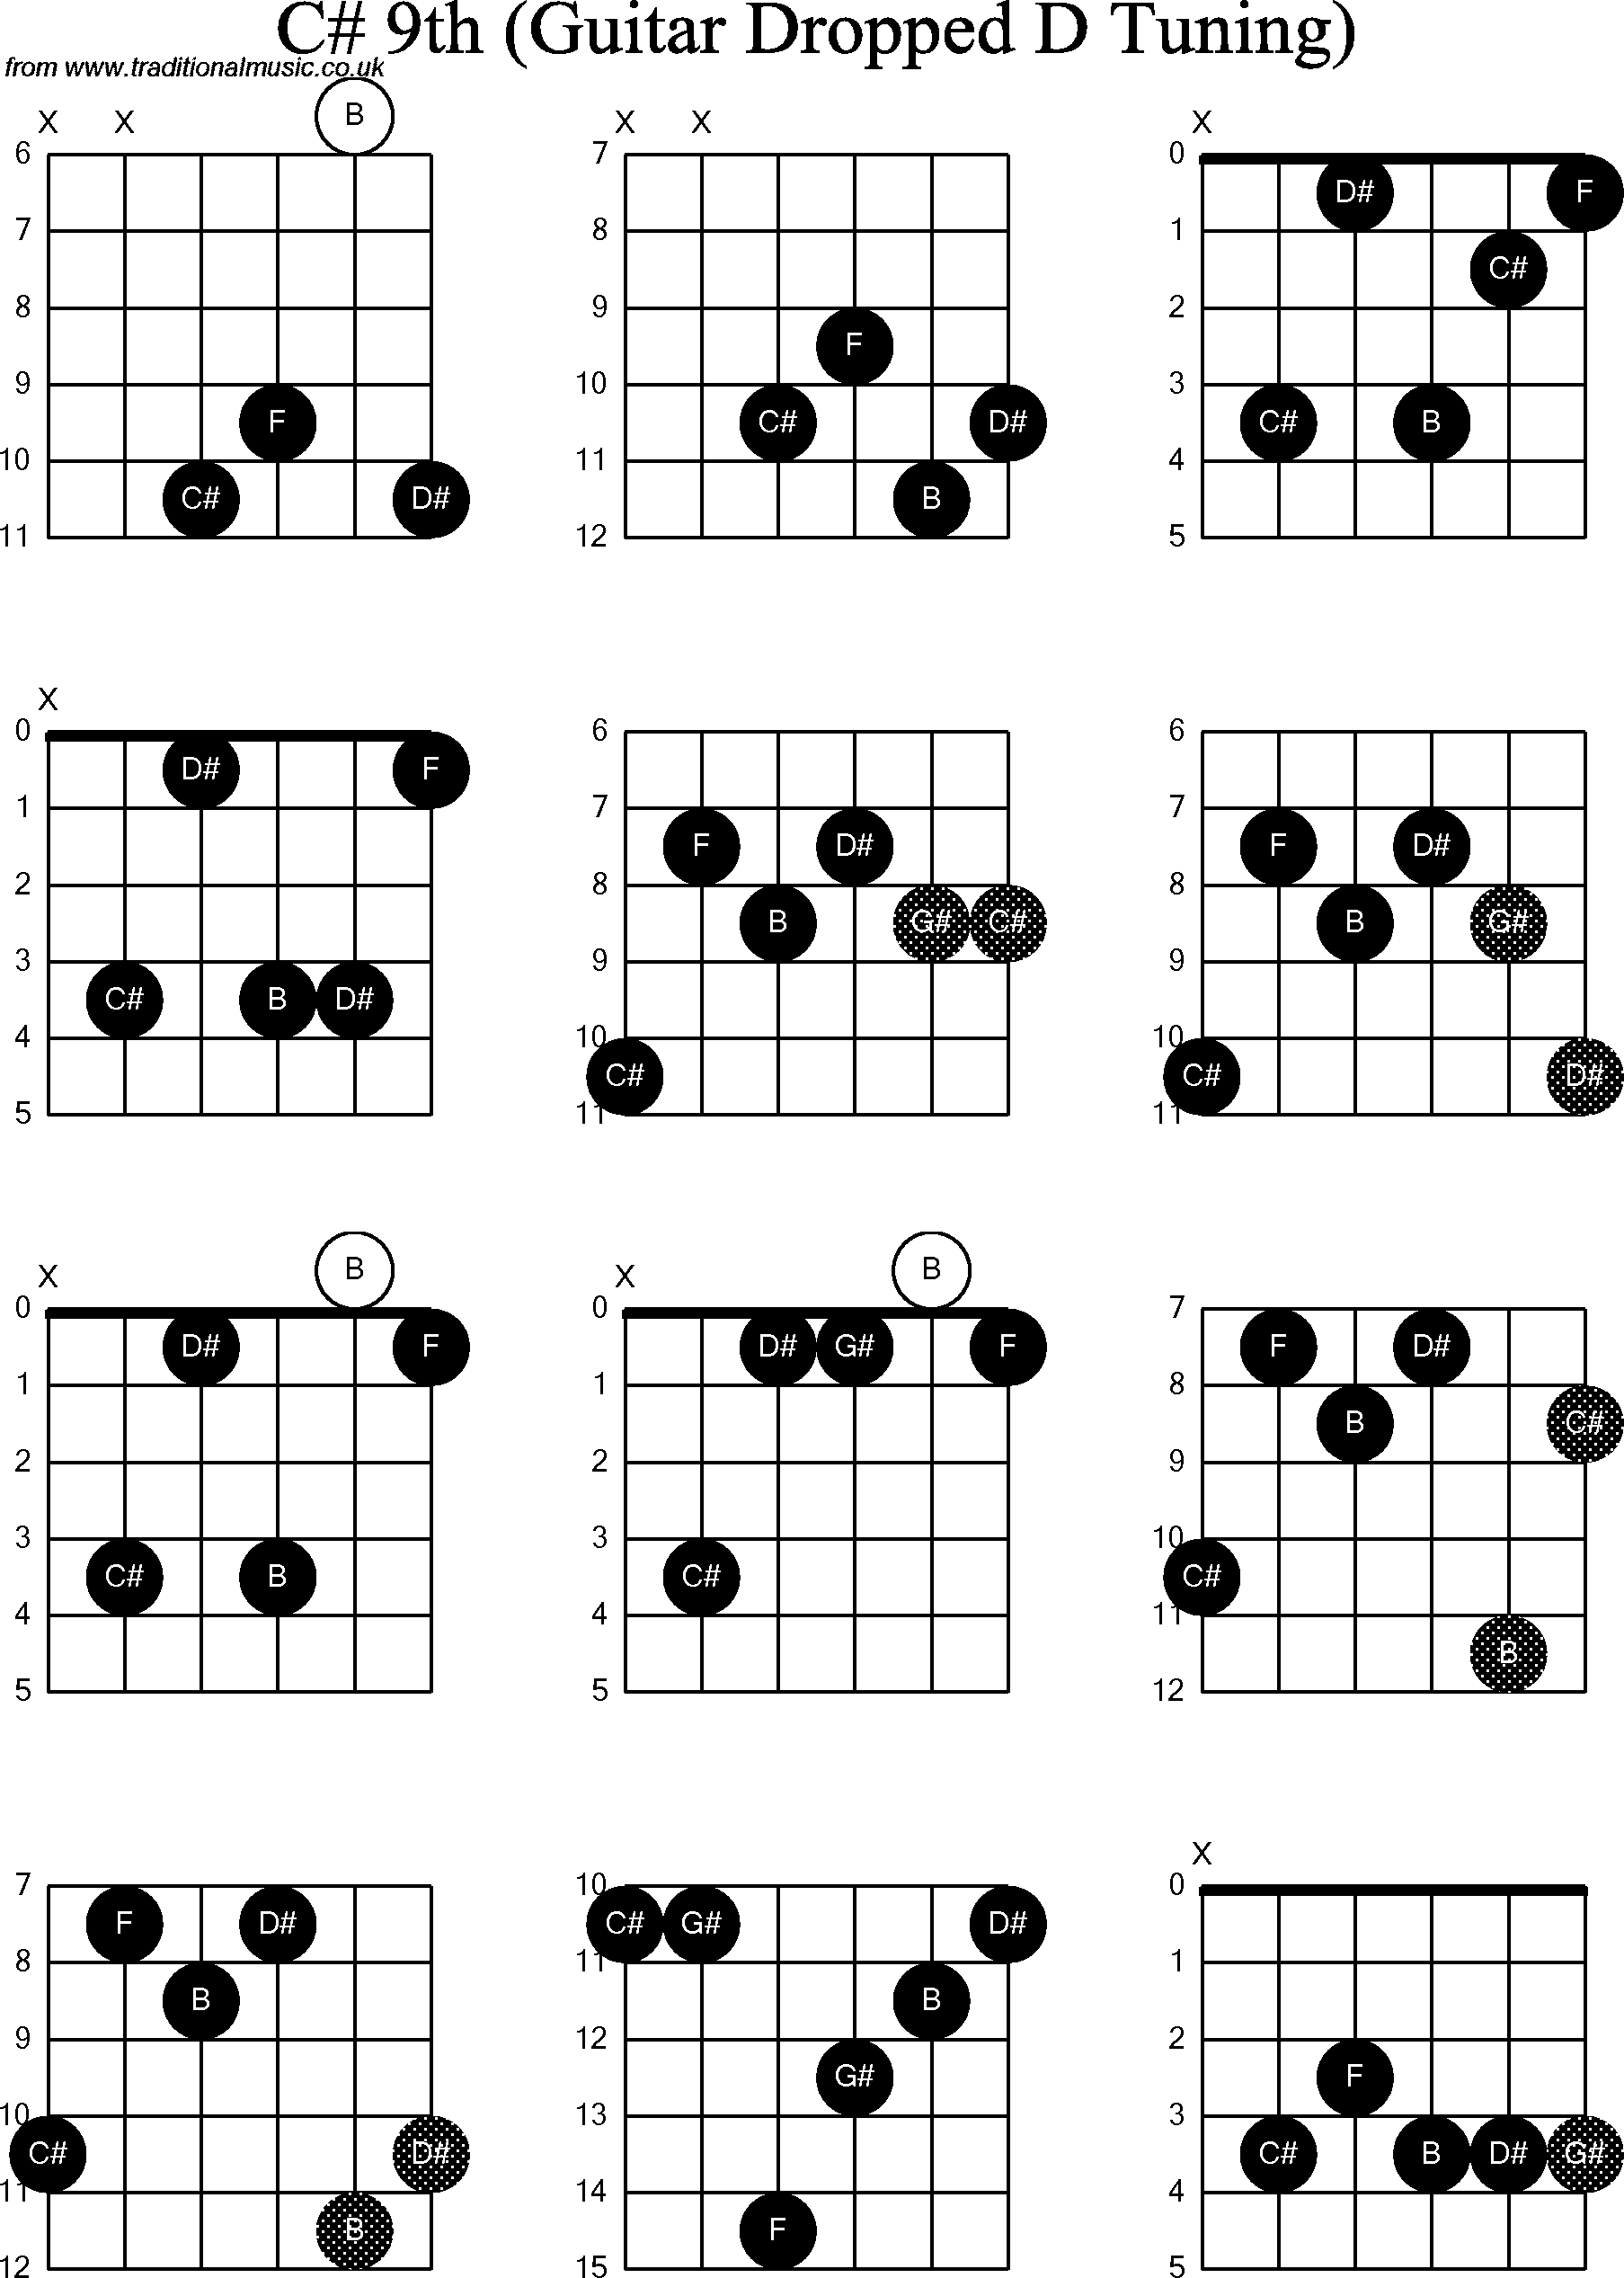 Chord Diagrams For Dropped D Guitar Dadgbe C Sharp9th